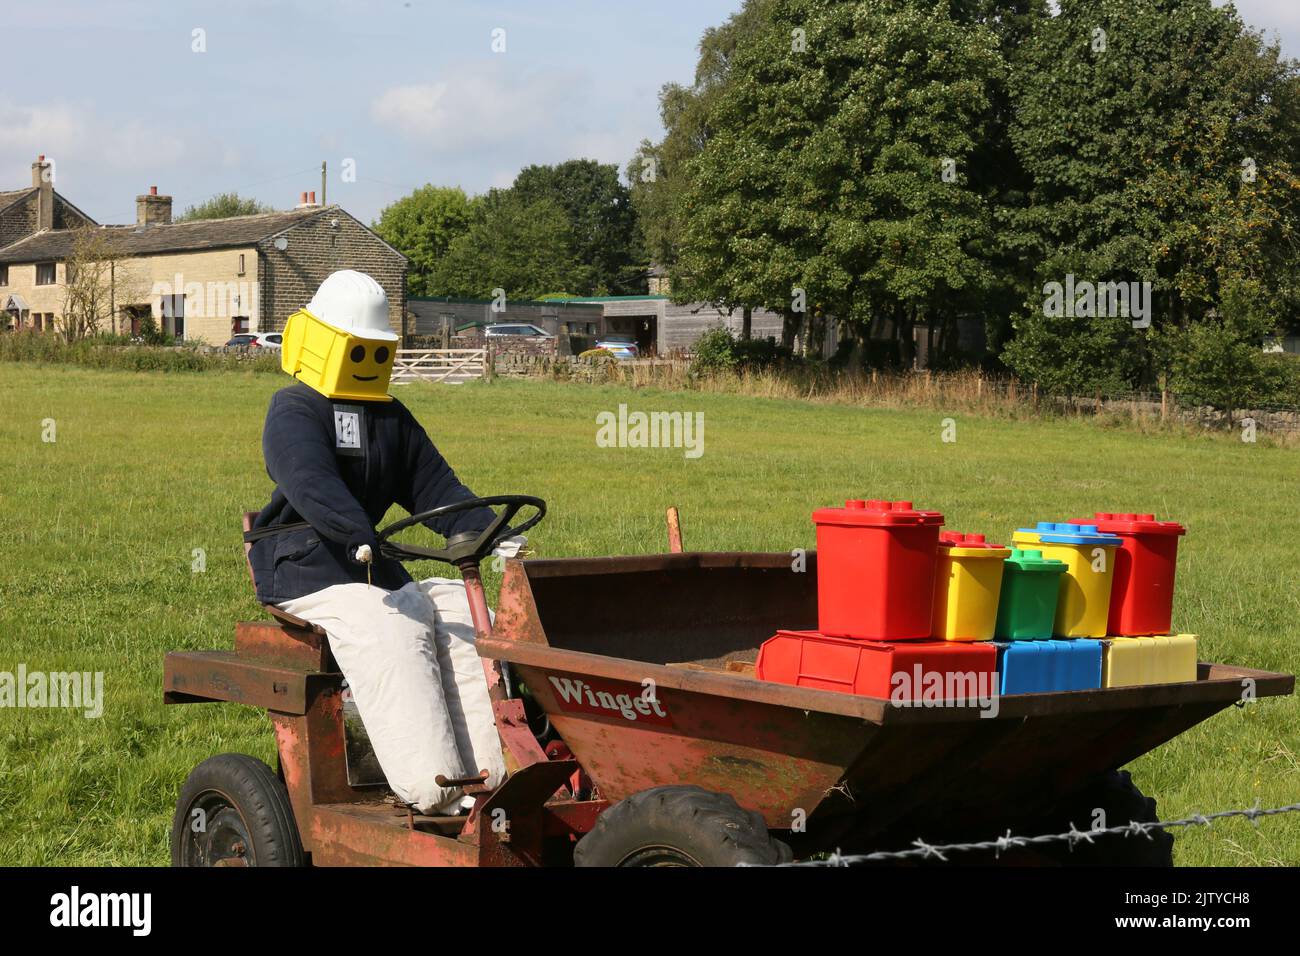 Norland, UK. 2nd September, 2022. The annual Norland scarecrow festival takes place with a theme of children's favourites.  Norland, West Yorkshire, UK. Credit: Barbara Cook/Alamy Live News Stock Photo